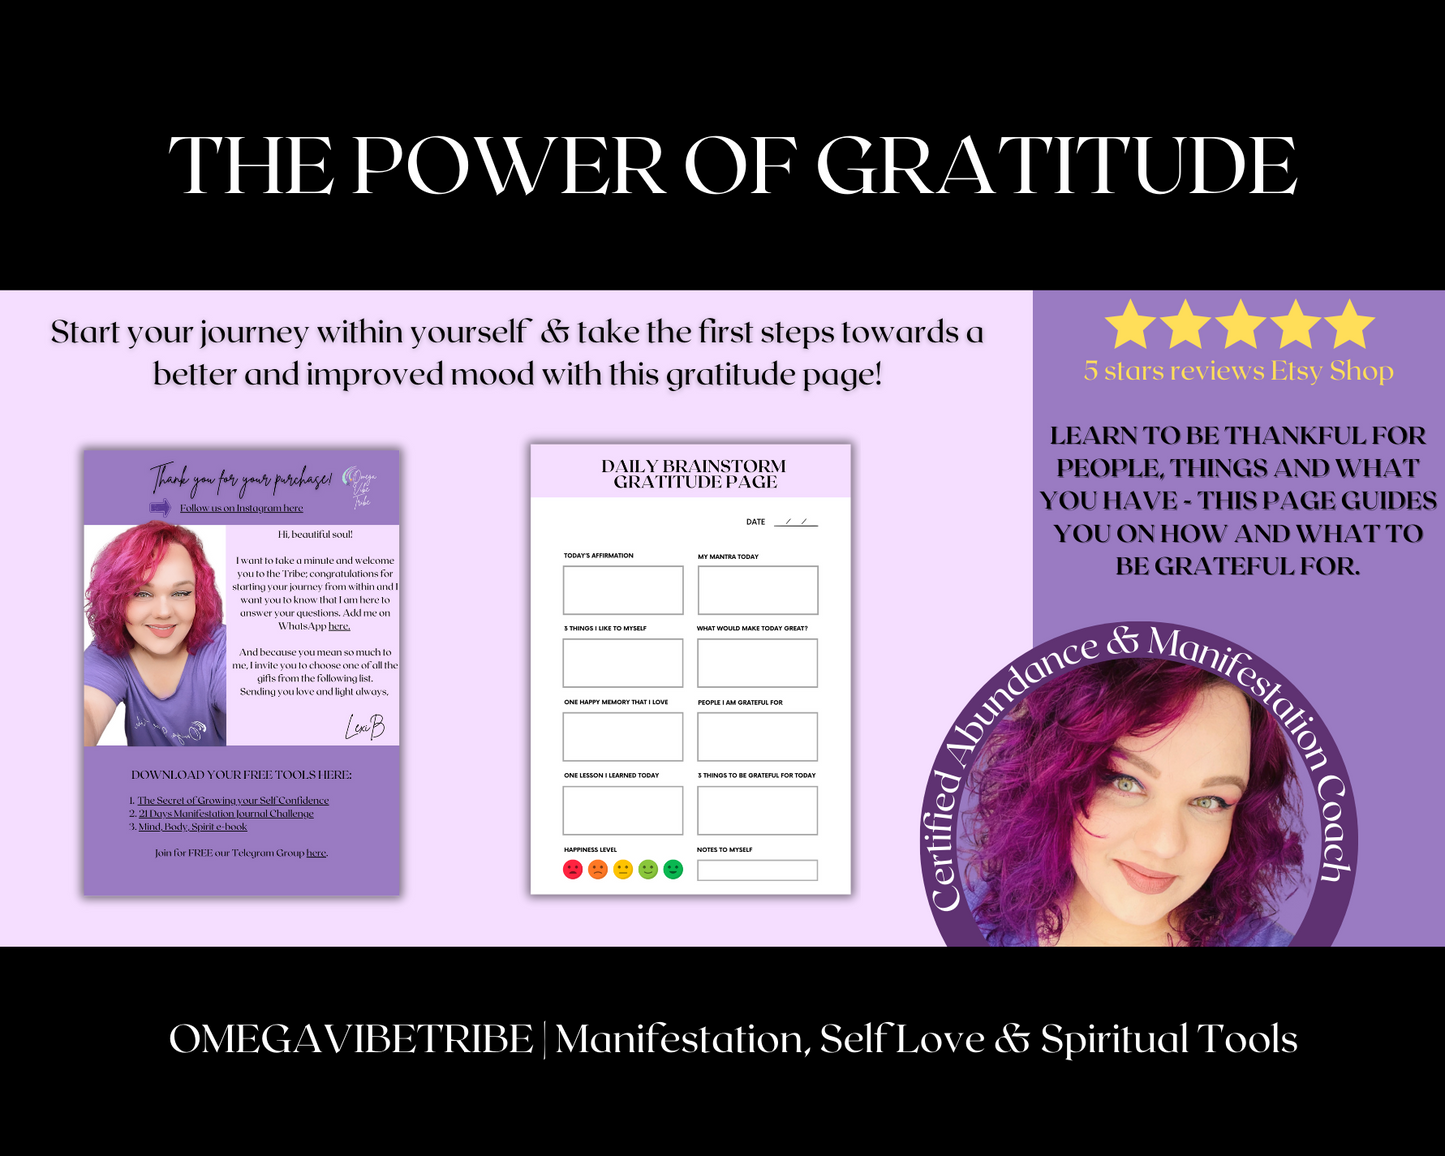 photo that shows the power of gratitude and the digital gratitude journal page